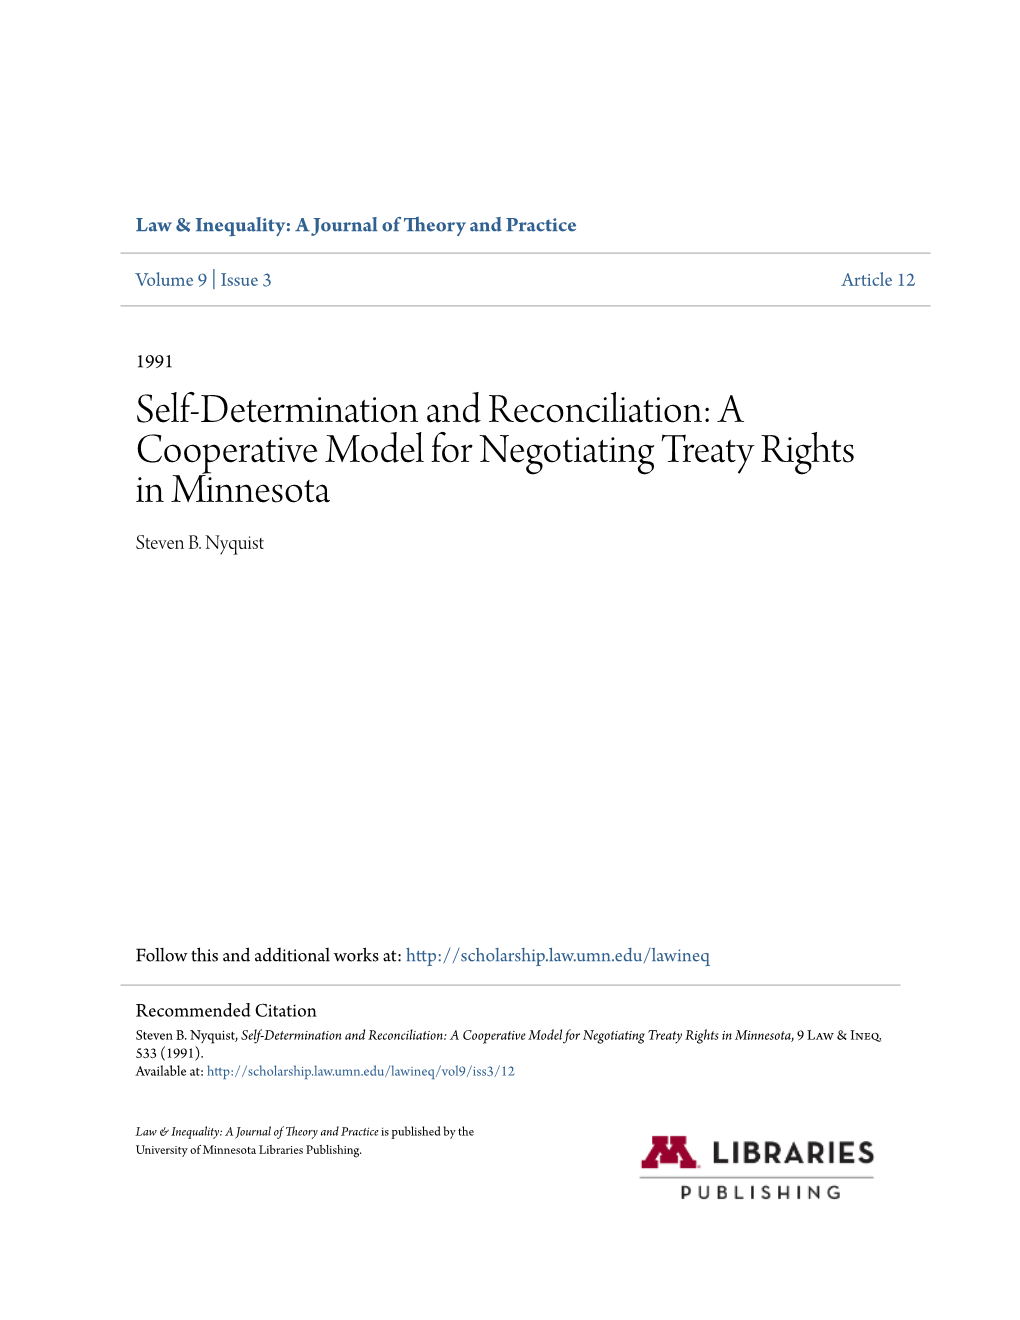 A Cooperative Model for Negotiating Treaty Rights in Minnesota Steven B